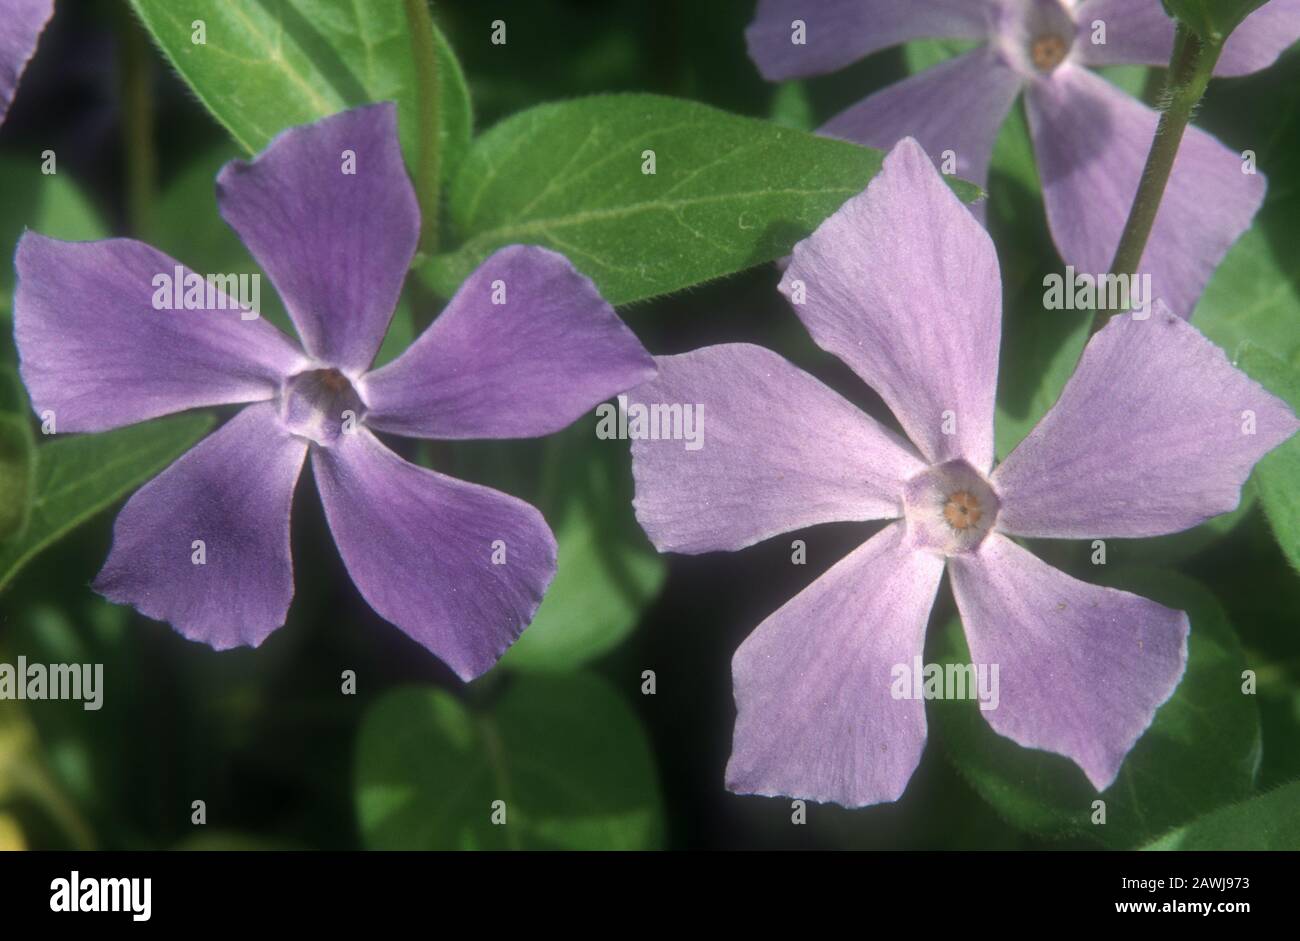 CLOSE-UP OF A VINCA MAJOR FLOWERS (KNOWN AS BIG LEAF PERIWINKLE, LARGE PERIWINKLE, GREATER AND BLUE PERIWINKLE) Stock Photo